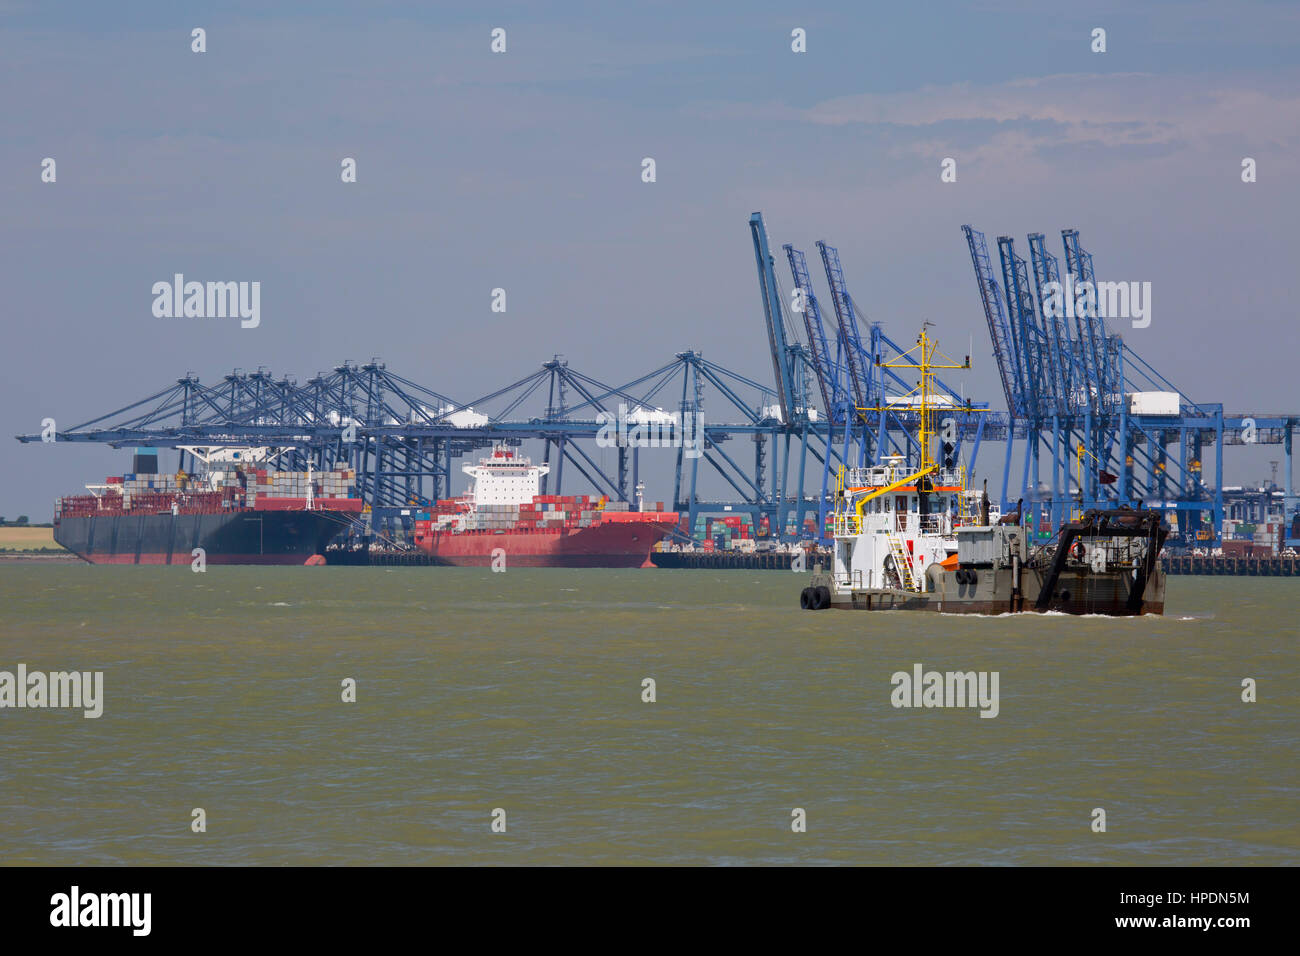 A line of container ships and cargo freighters berthed at Felixstowe container port, being unloaded or loaded, with a tug in the foreground. Stock Photo